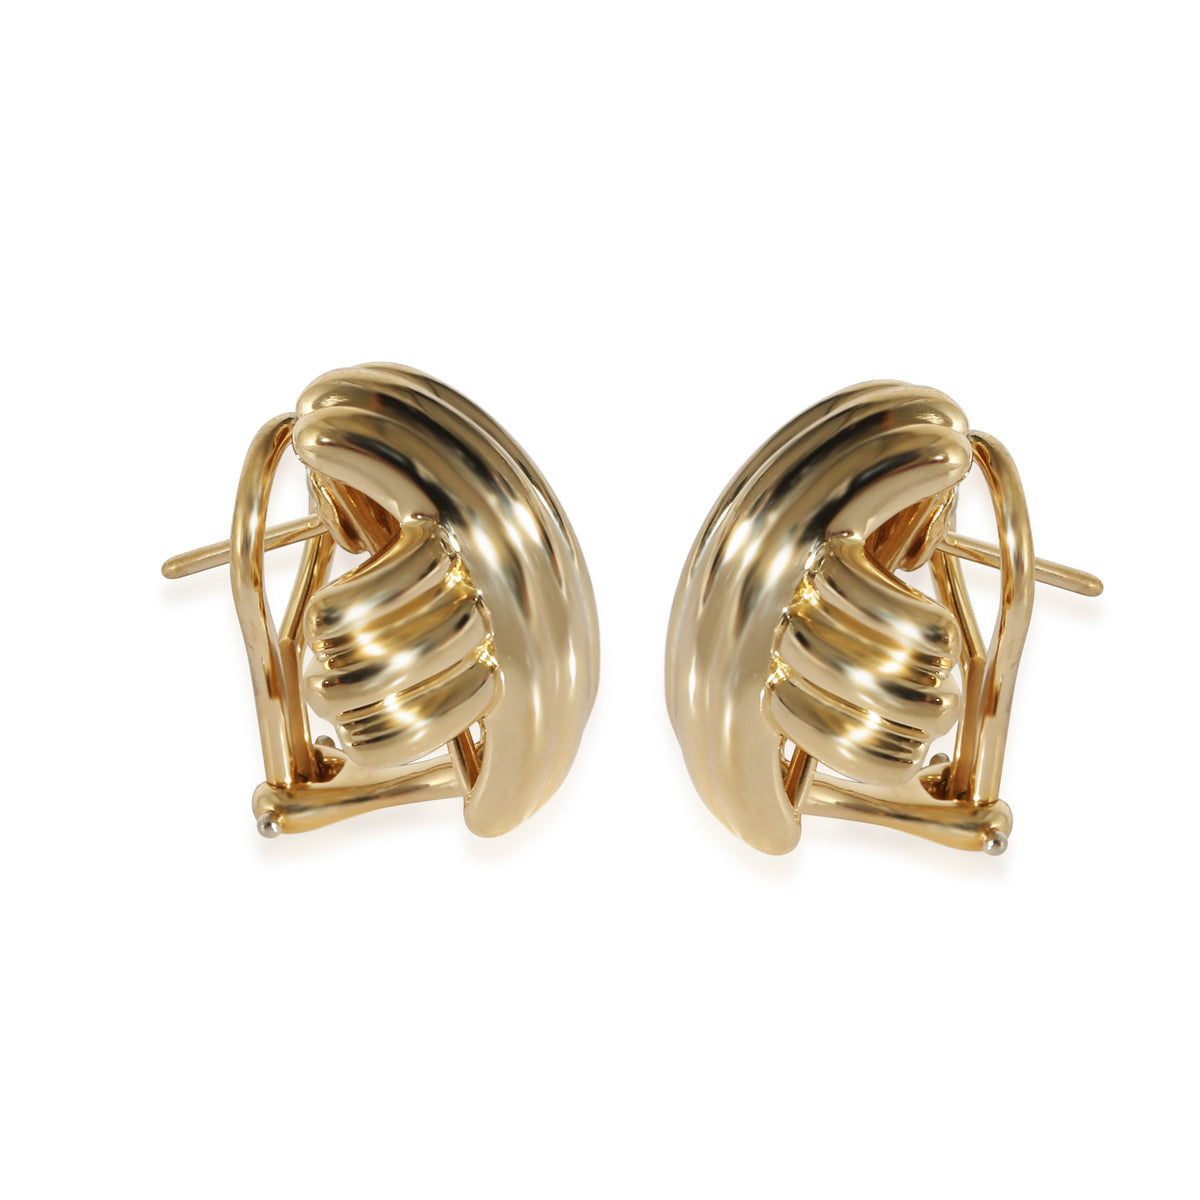 Tiffany & Co. Vintage Signature X Earrings in 18K Yellow Gold